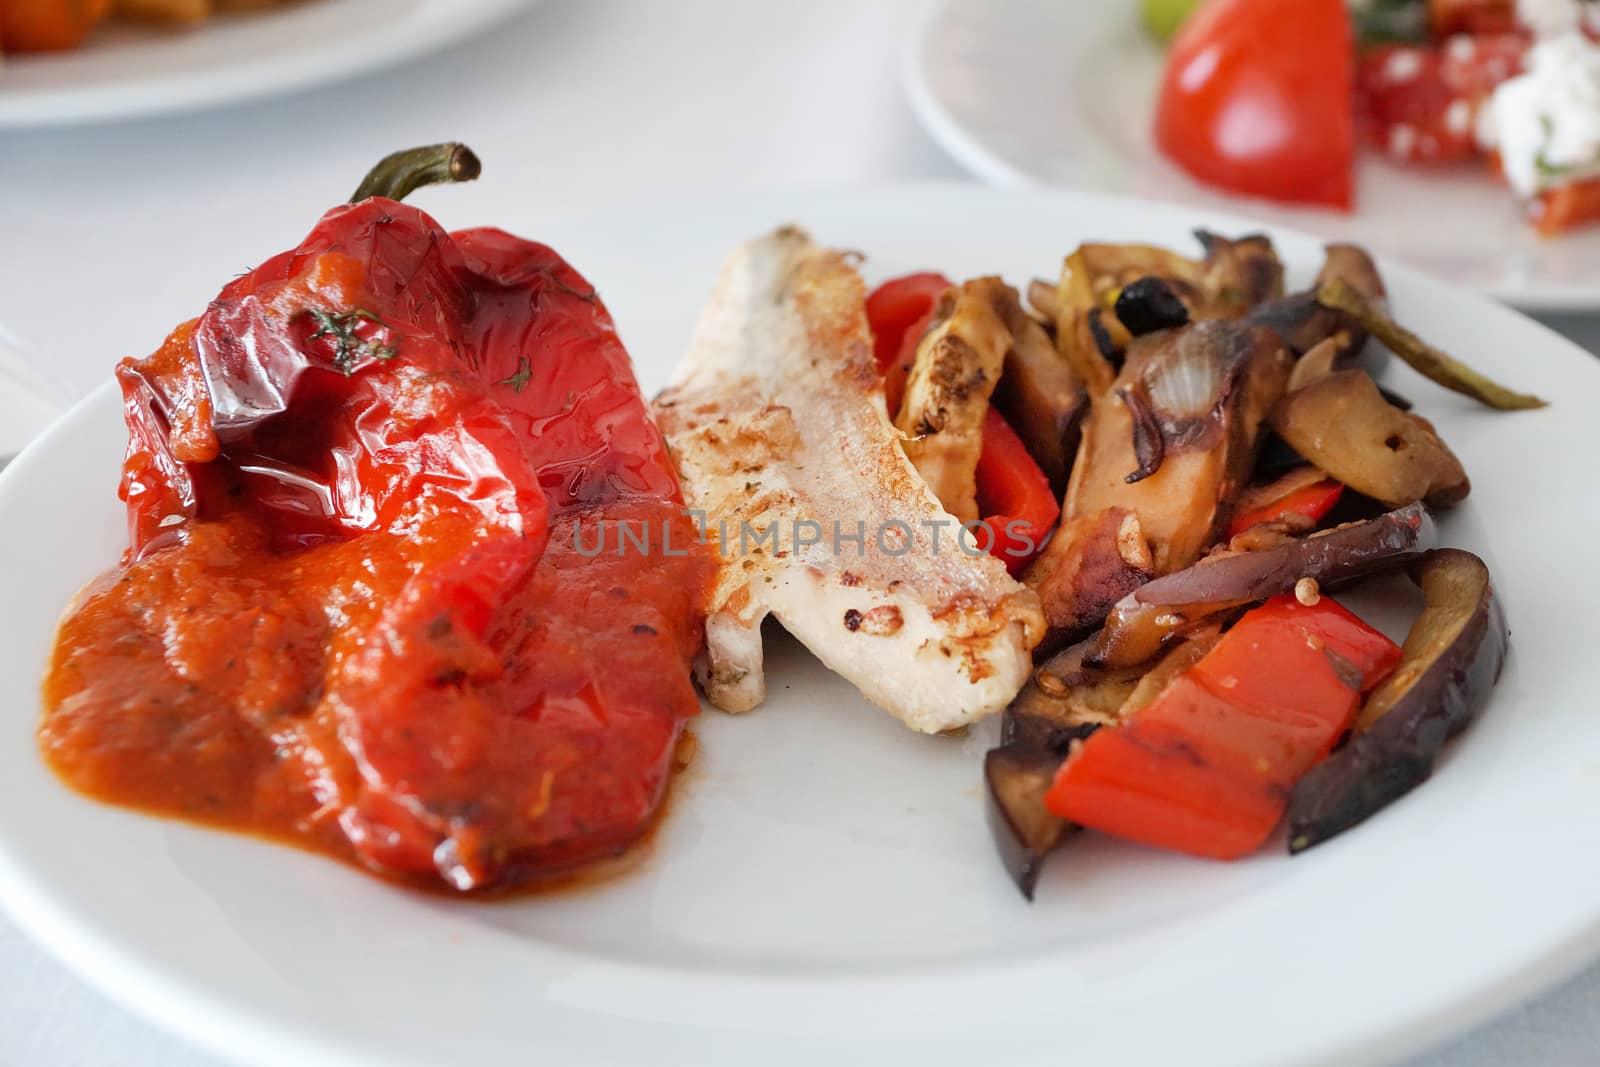 fish fillet with baked peppers and vegetables on a plate by Annado